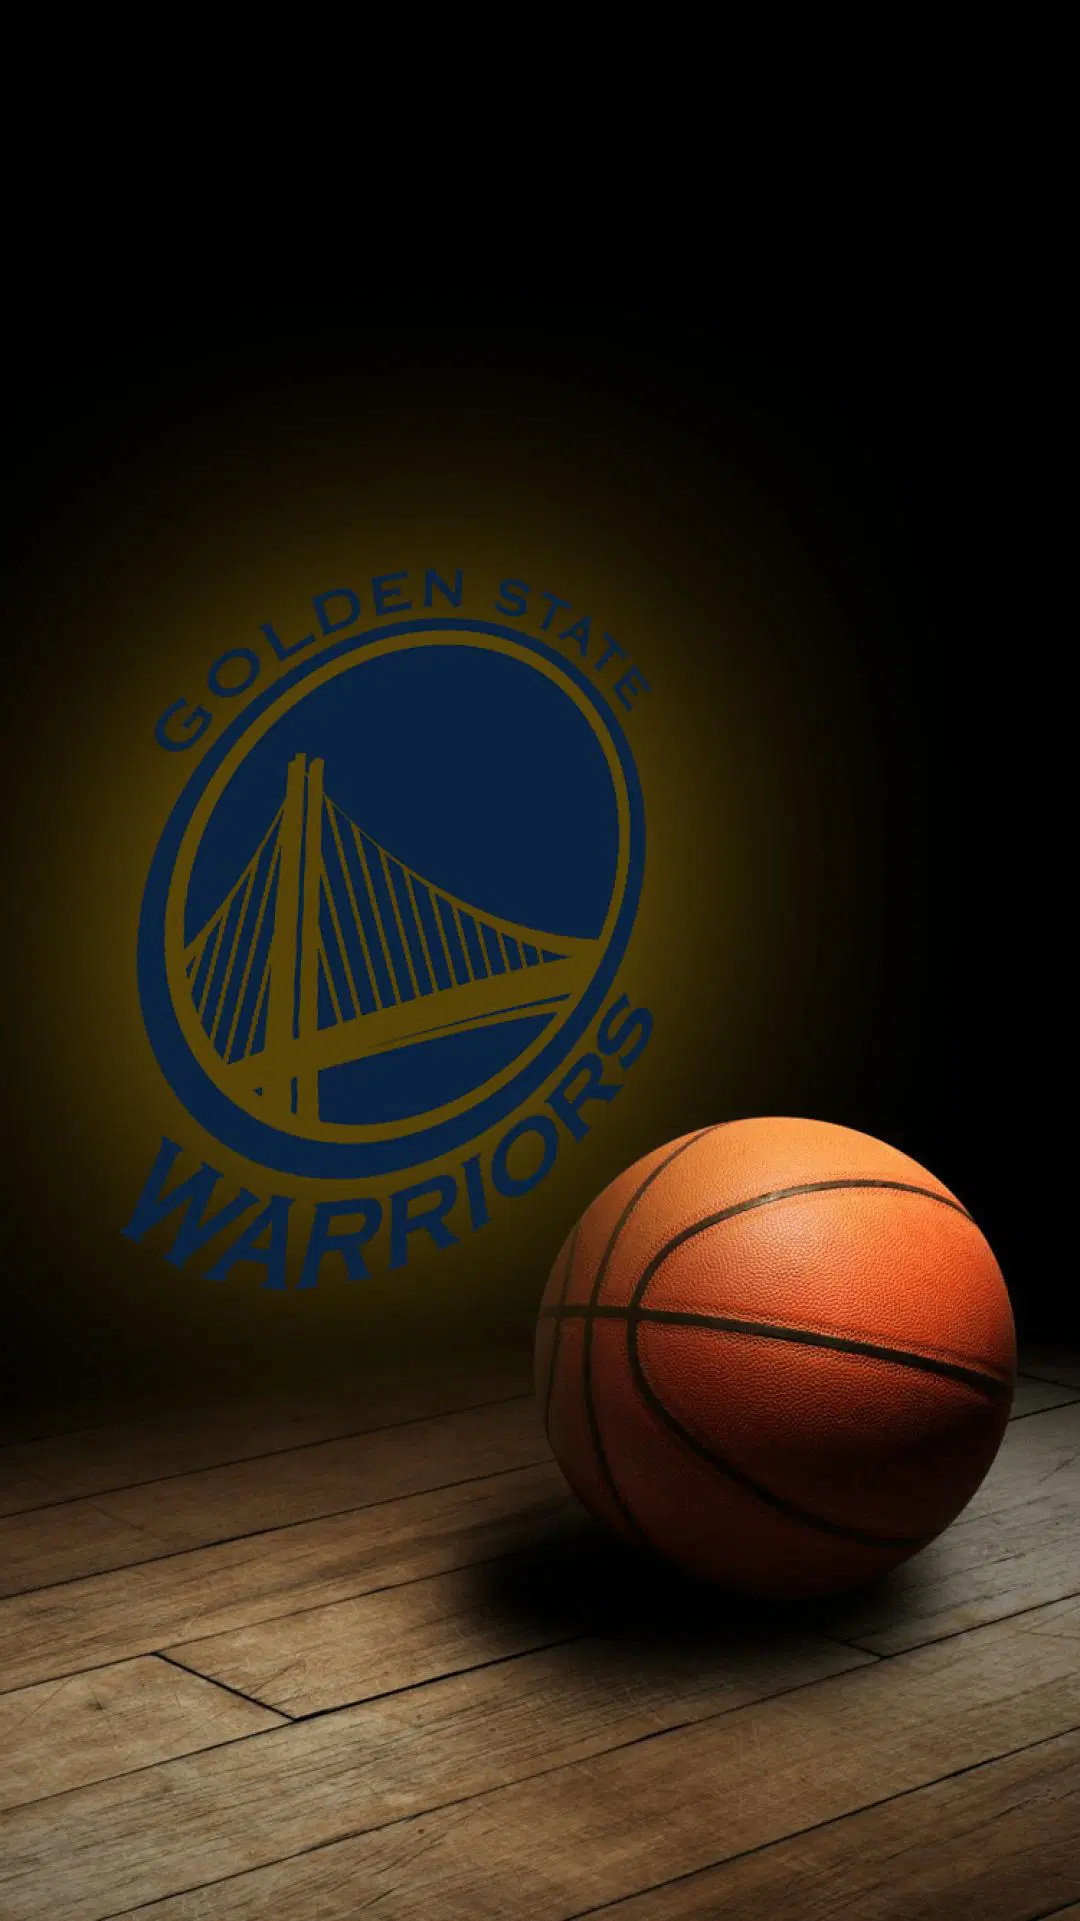 Golden State Warriors: The team returned to championship glory in 2015 NBA season. 1080x1930 HD Wallpaper.